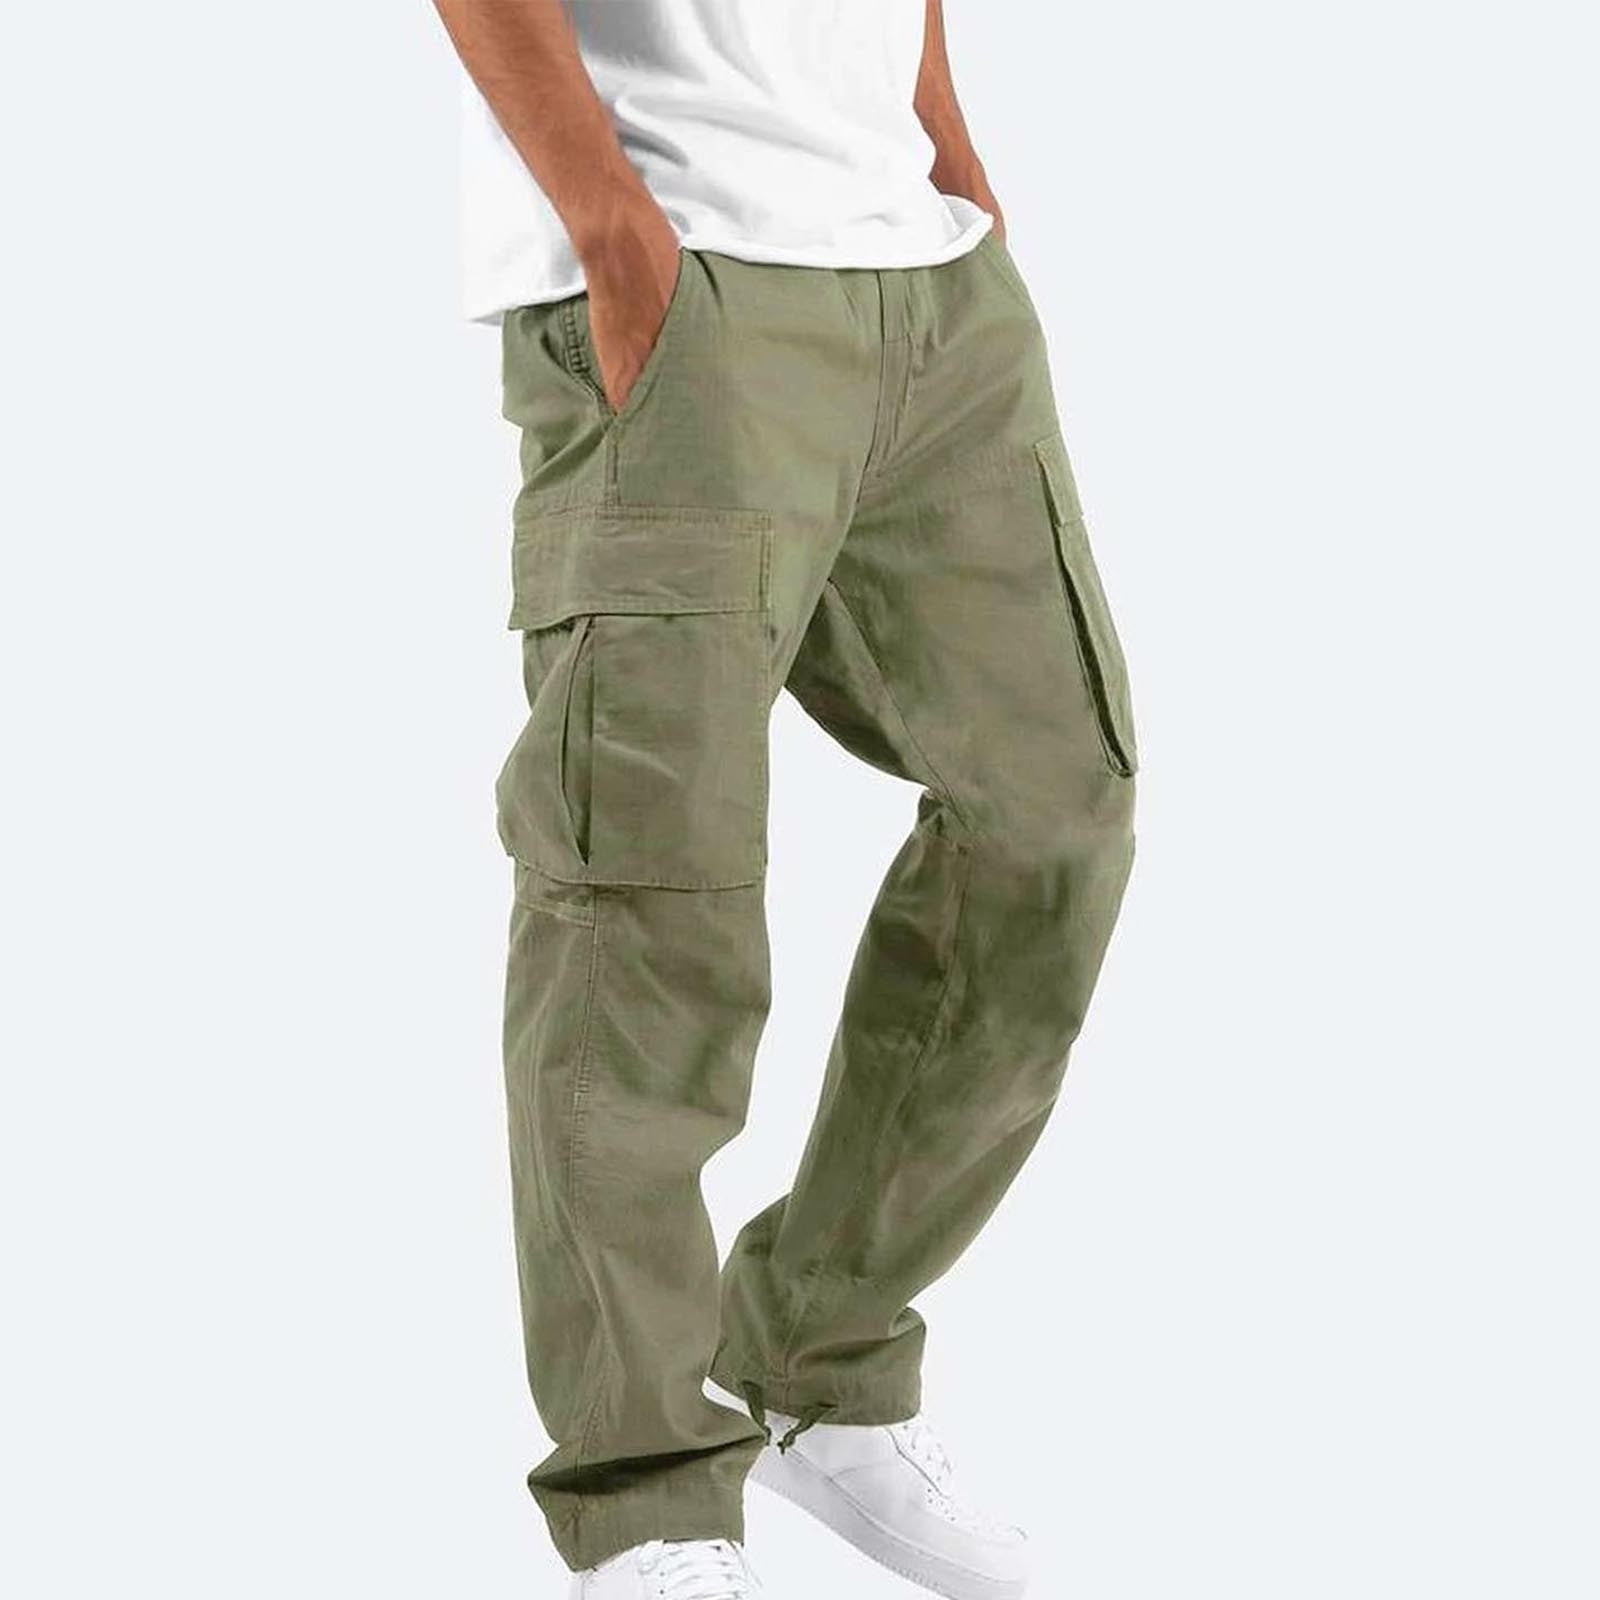 Alcis Women Olive Green Solid Slim Fit Track Pants ECWPASS2104016-S